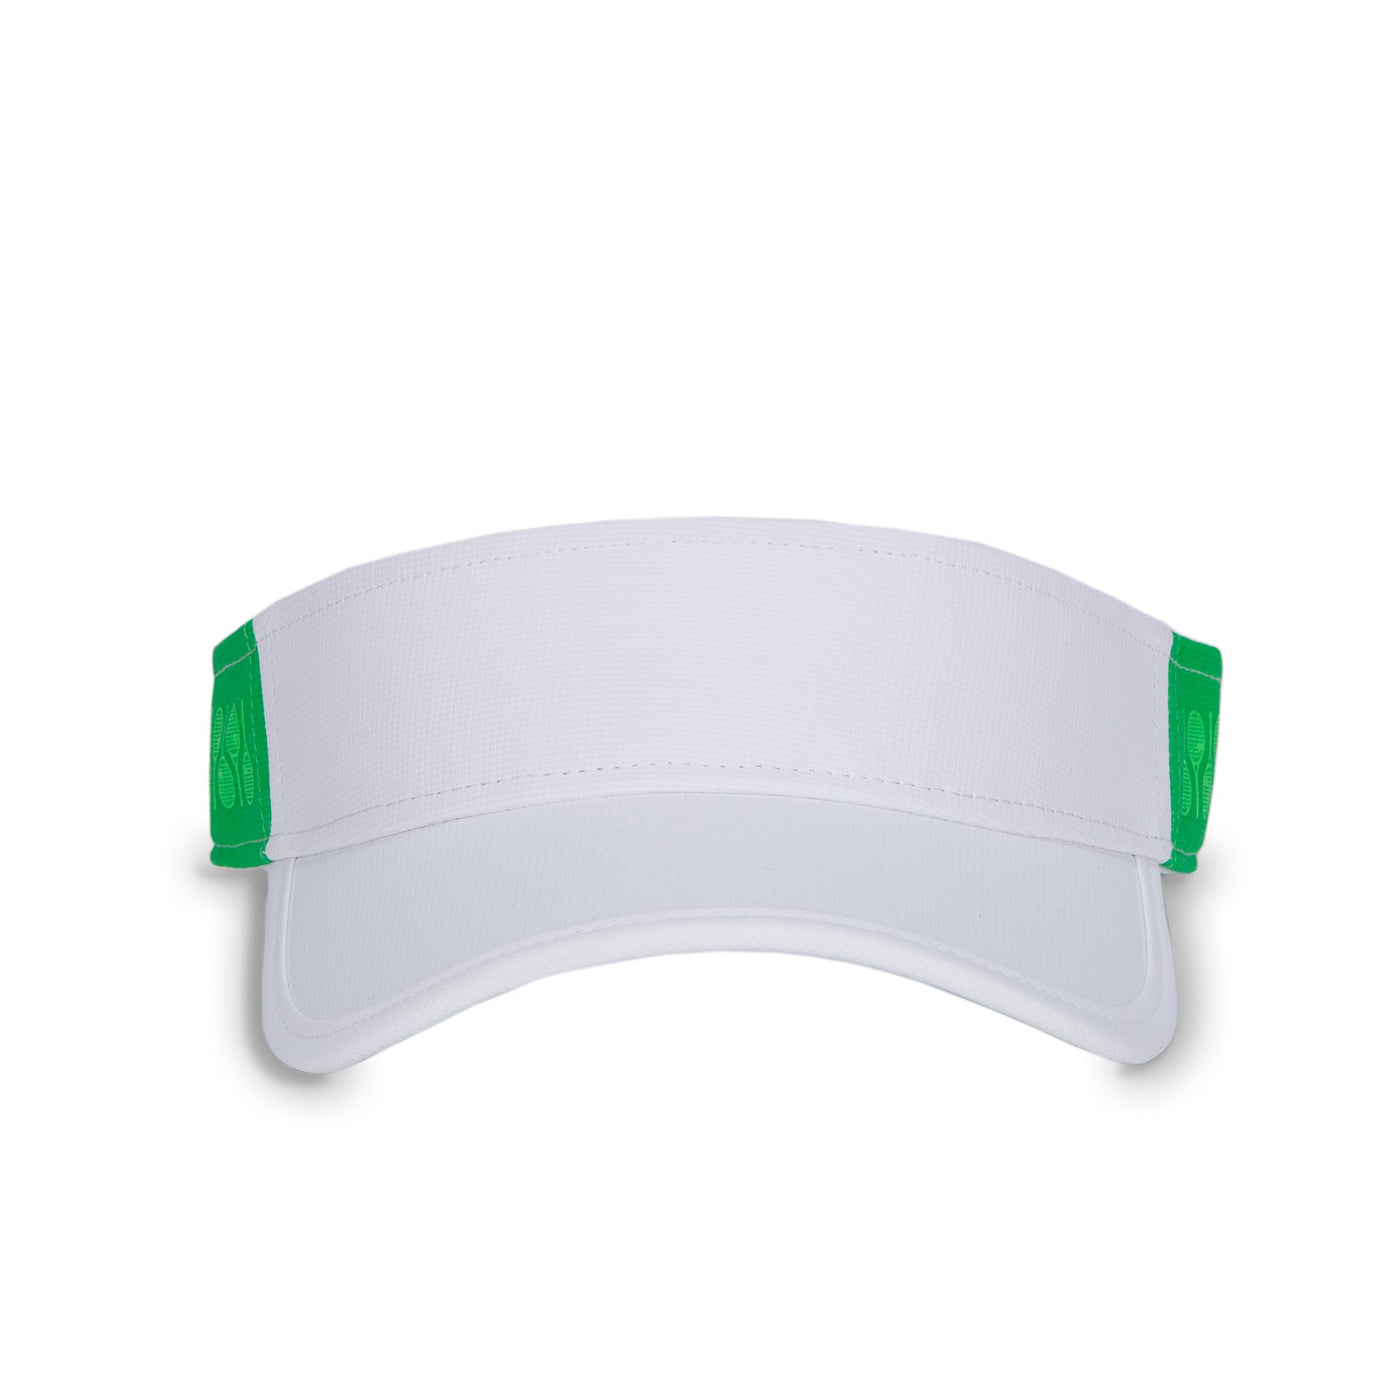 Front view of green tonal Racquets Head in the game visor. Front of visor is white and the sides are dark green with lime green racquets printed.